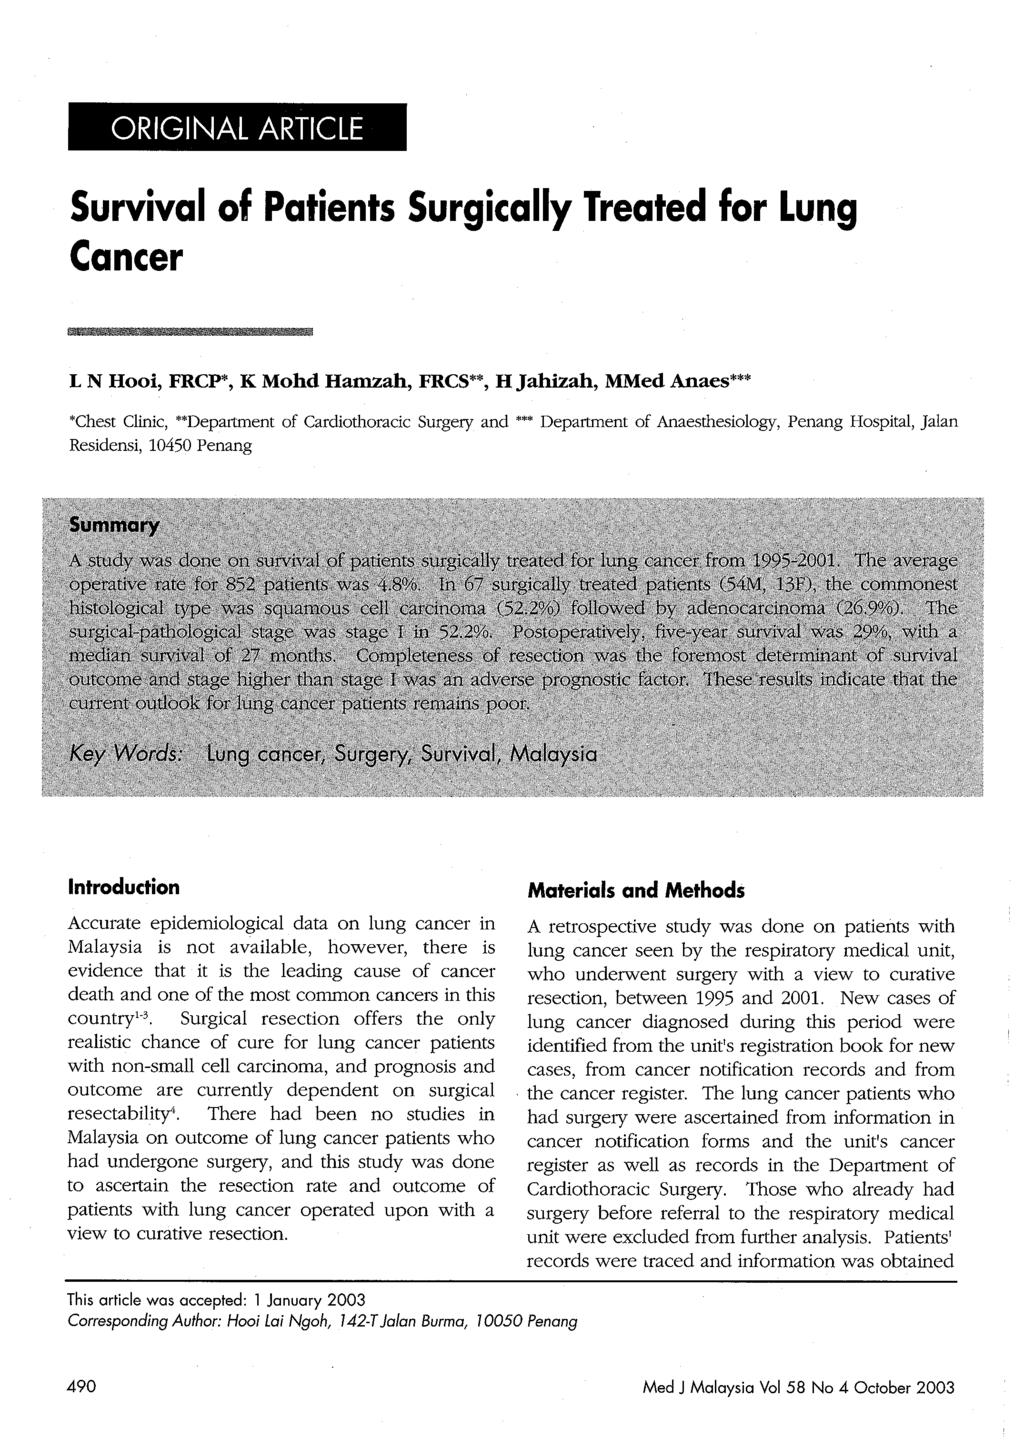 ORIGINAL ARTICLE Survival of Patients Surgically Treated for Lung Cancer _'Illllllllll!